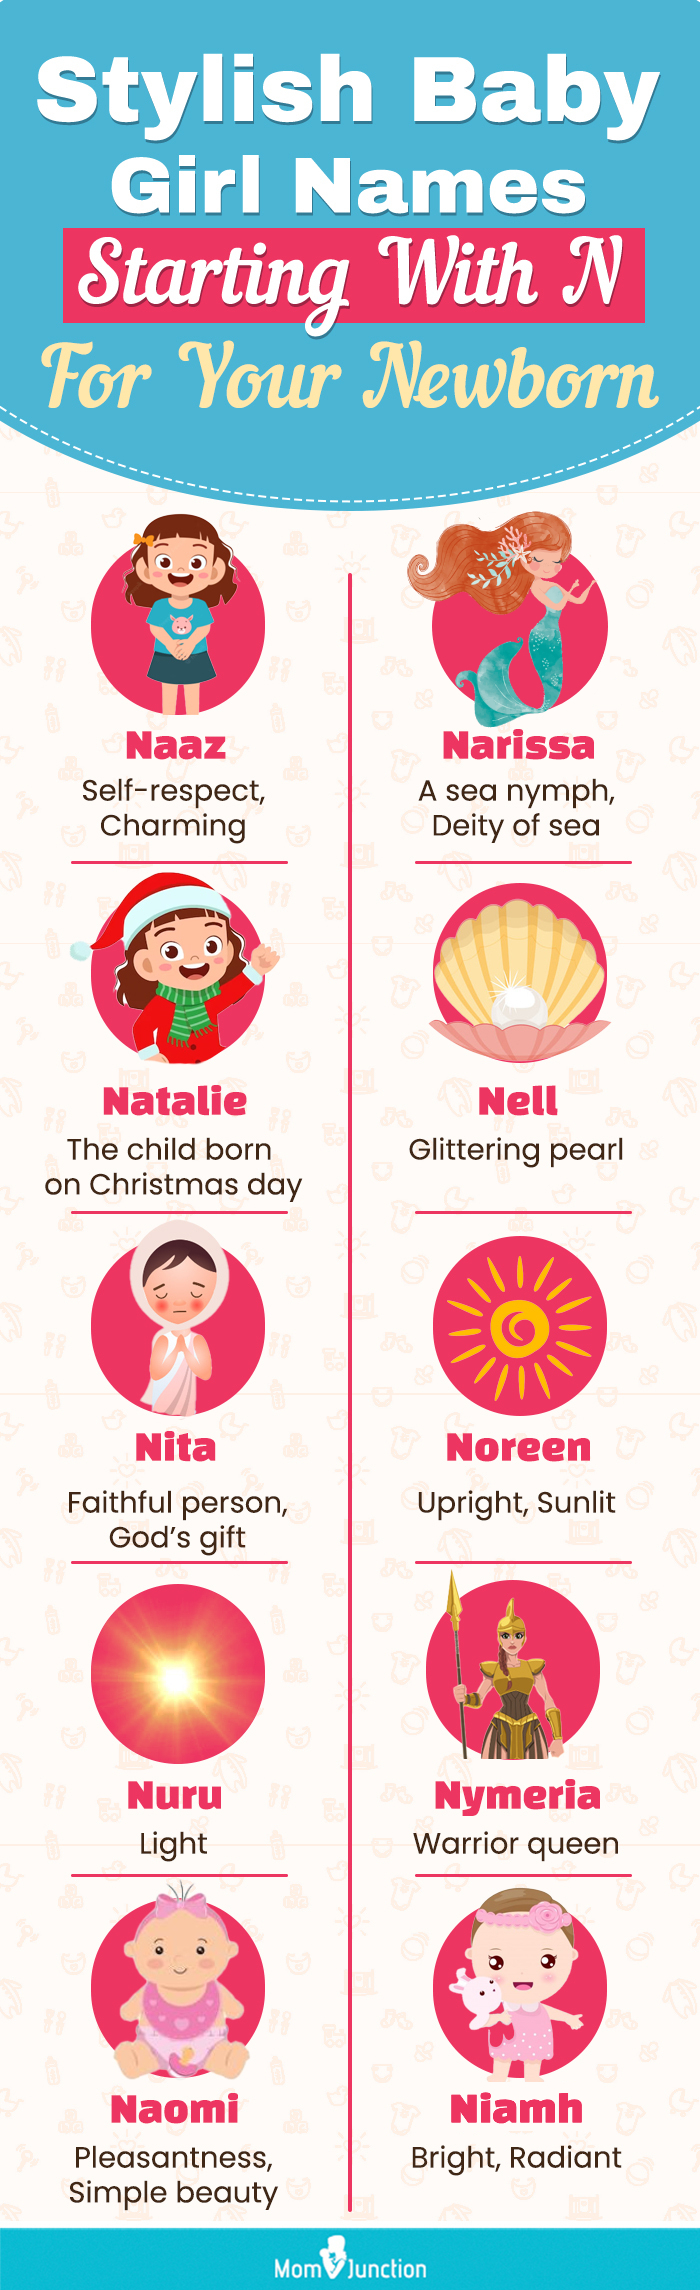 stylish baby girl names starting with n for your newborn (infographic)